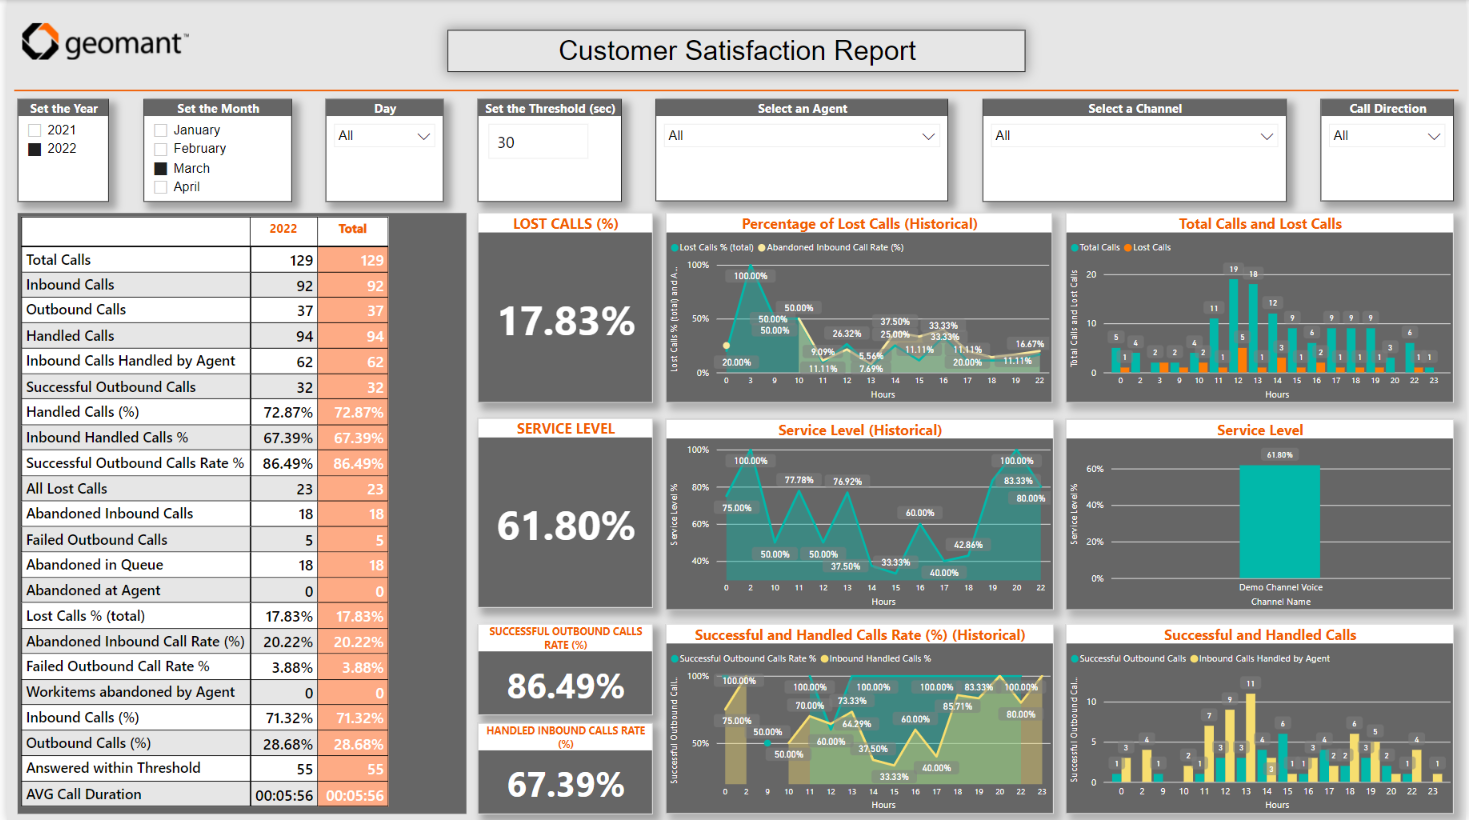 Customer Satisfaction Report page